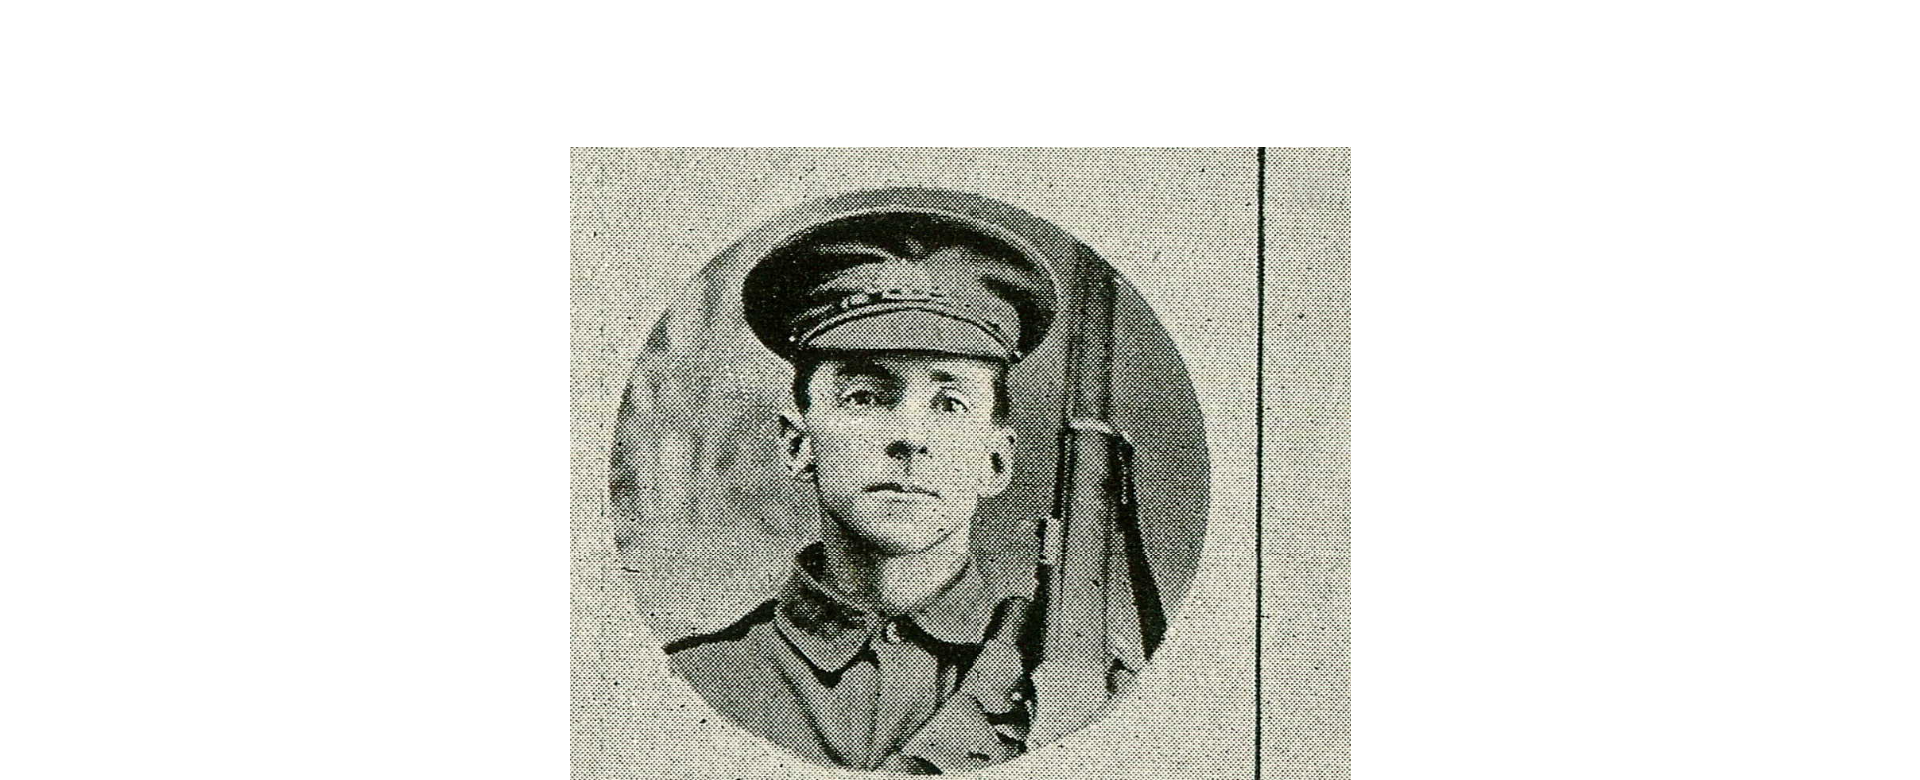 PENNEFATHER, John William Seward. Private KEH. 1000. Re-enlisted AIF and photograph shown of him in AIF service in 1918.